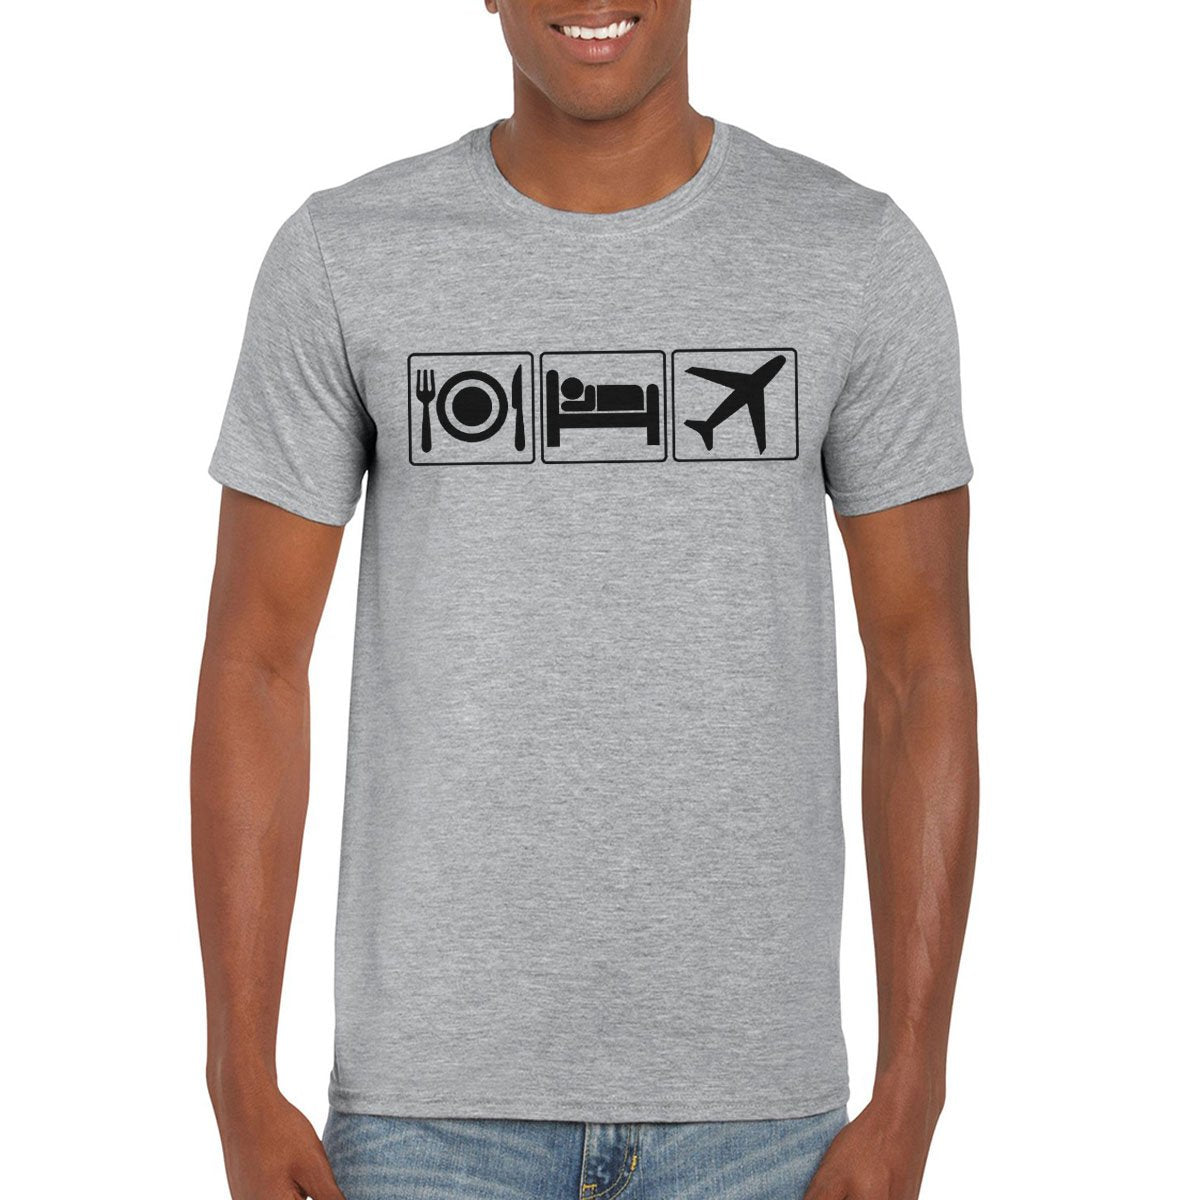 EAT SLEEP FLY Semi-Fitted Unisex T-Shirt